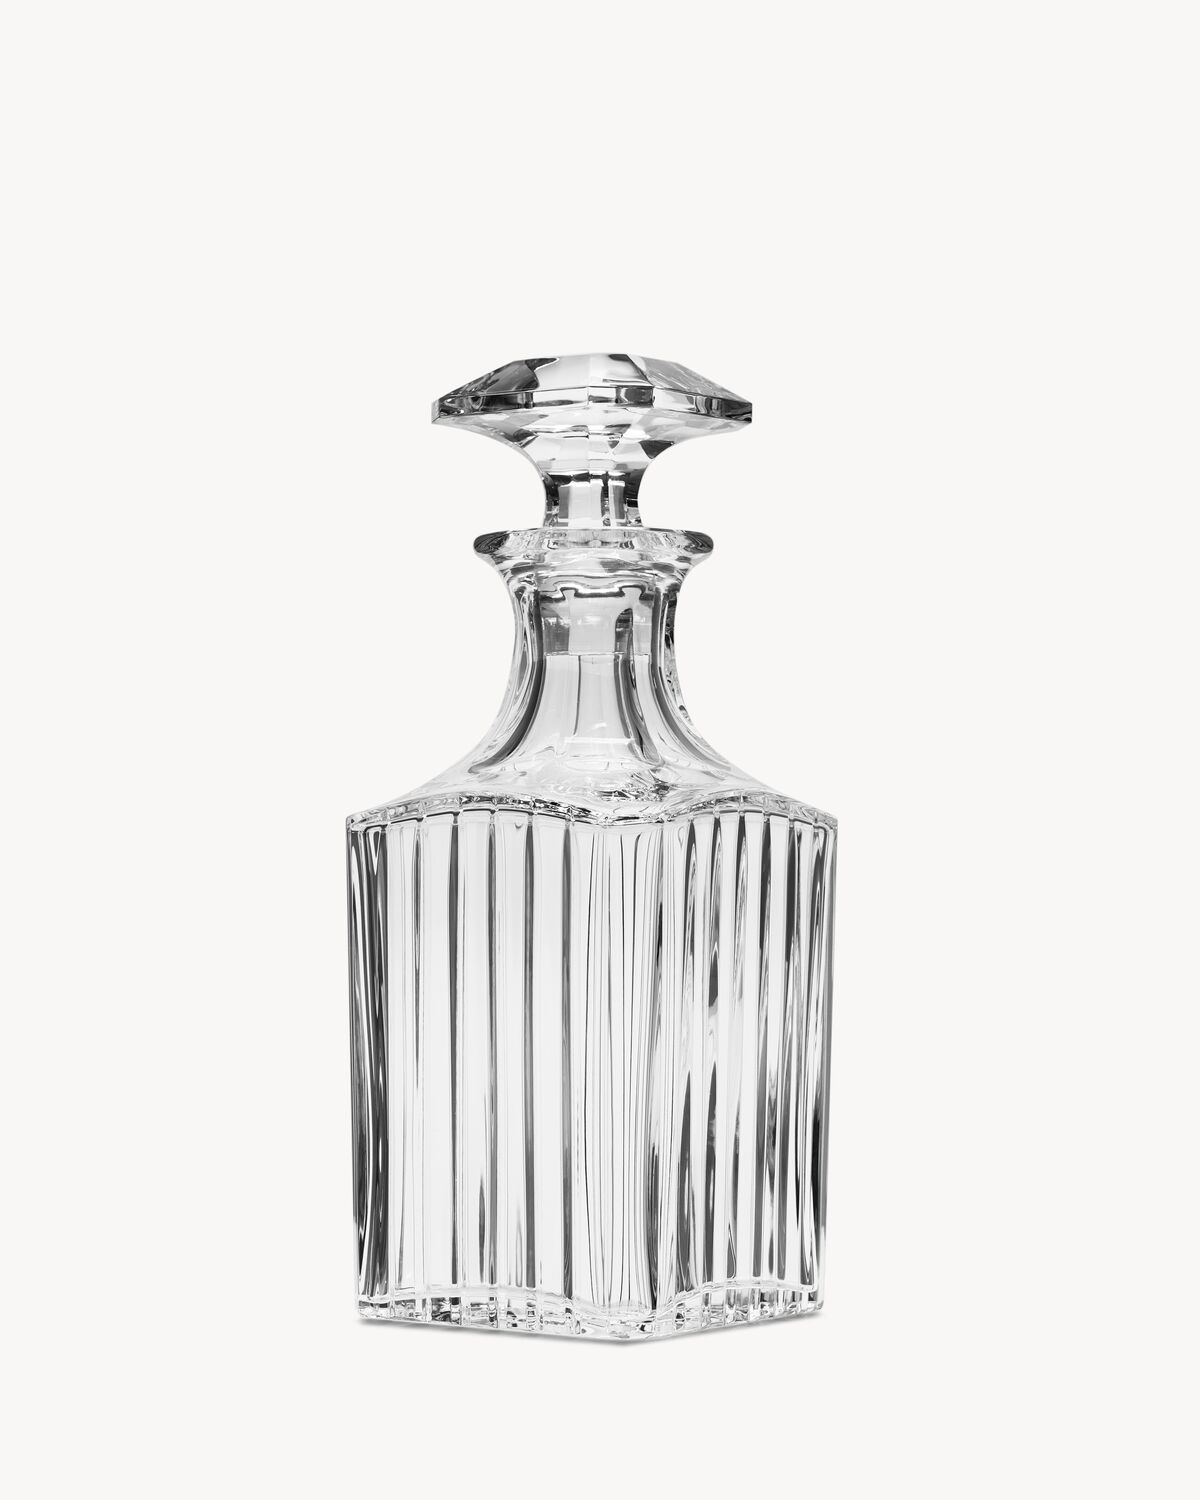 Baccarat Harmonie whiskey squared decanter